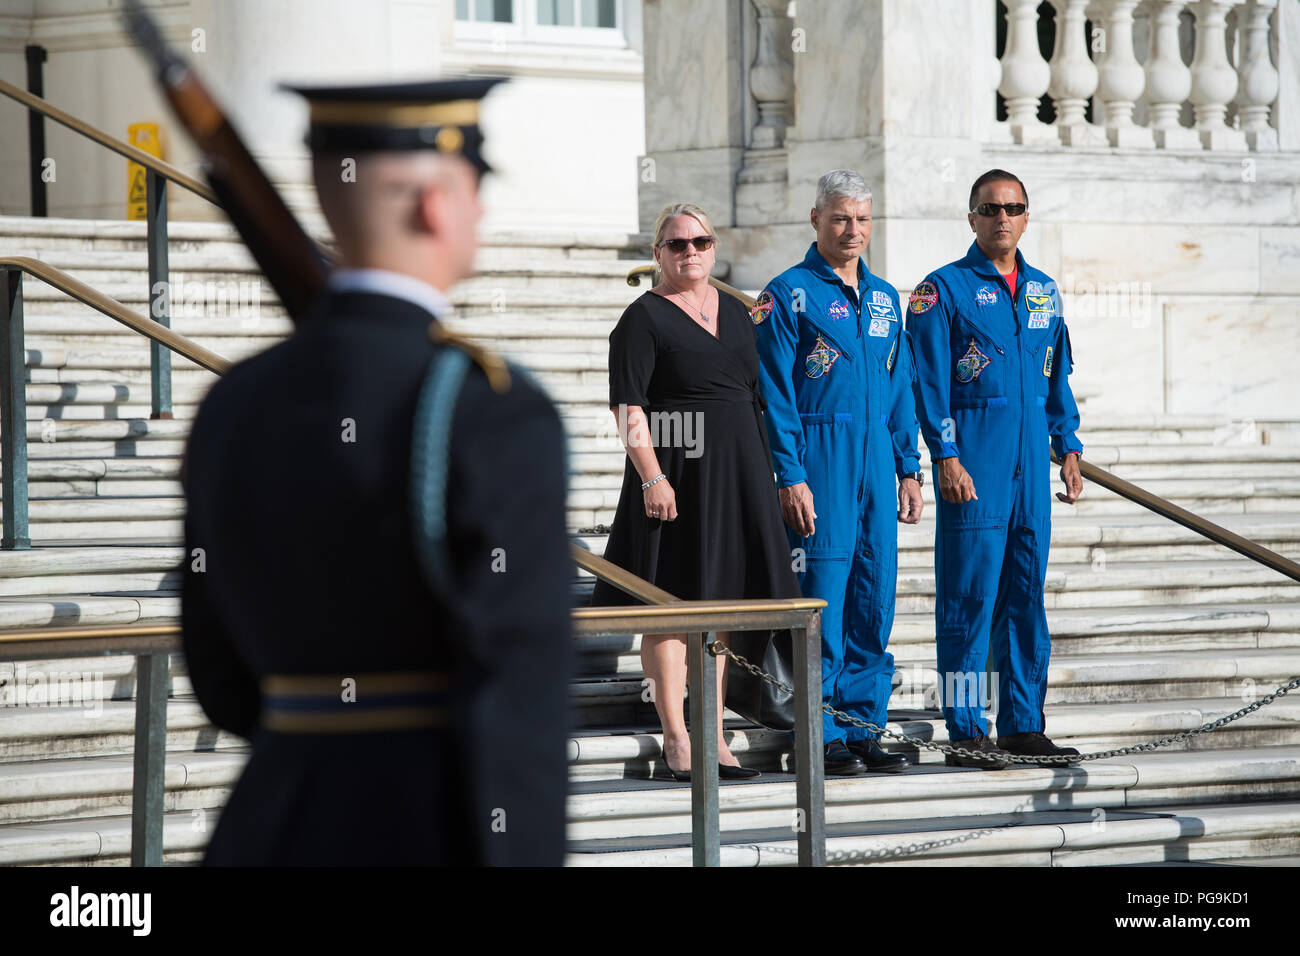 NASA astronaut Mark Vande Hei, center, his wife Julie, left, and NASA  astronaut Joe Acaba witness the changing of the guards at the Tomb of the  Unknown soldier, Friday, June 15, 2018